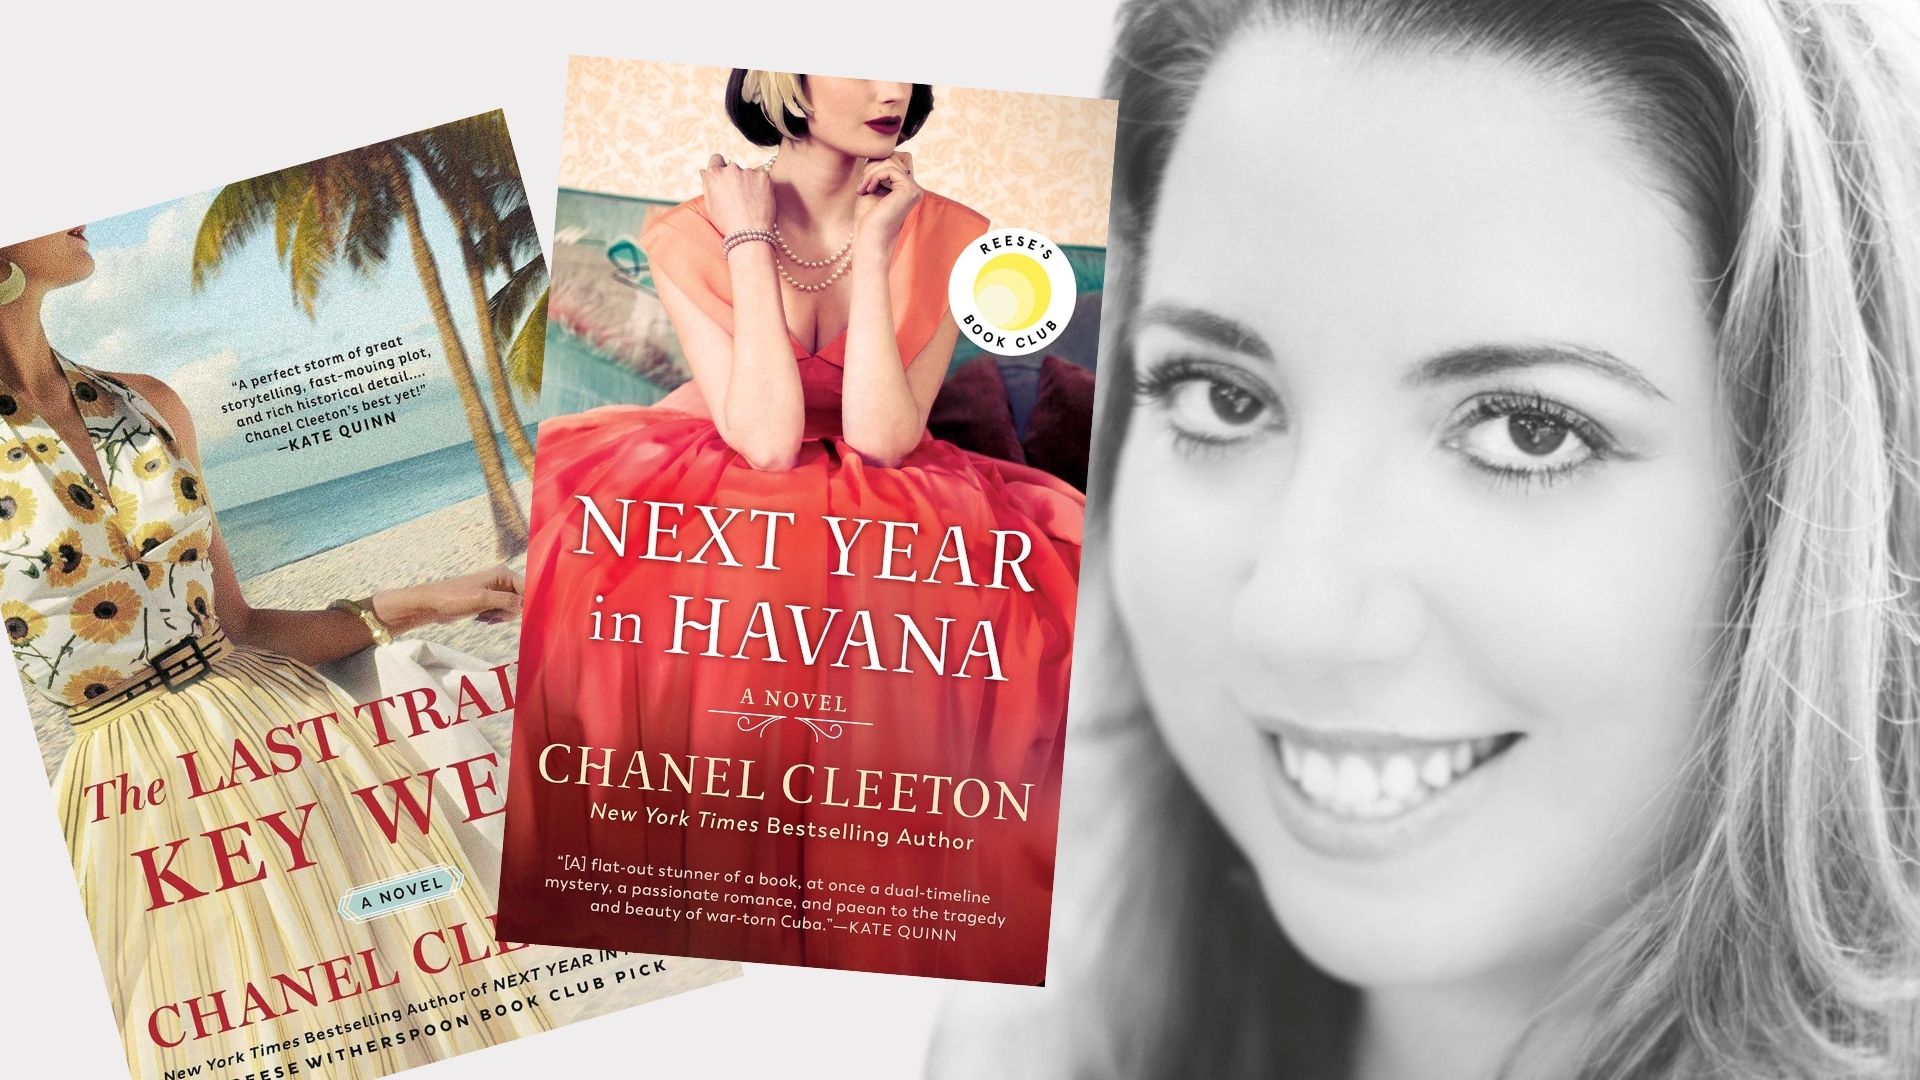 The Last Train to Key West” by Chanel Cleeton (Review) – Courtney Reads  Romance